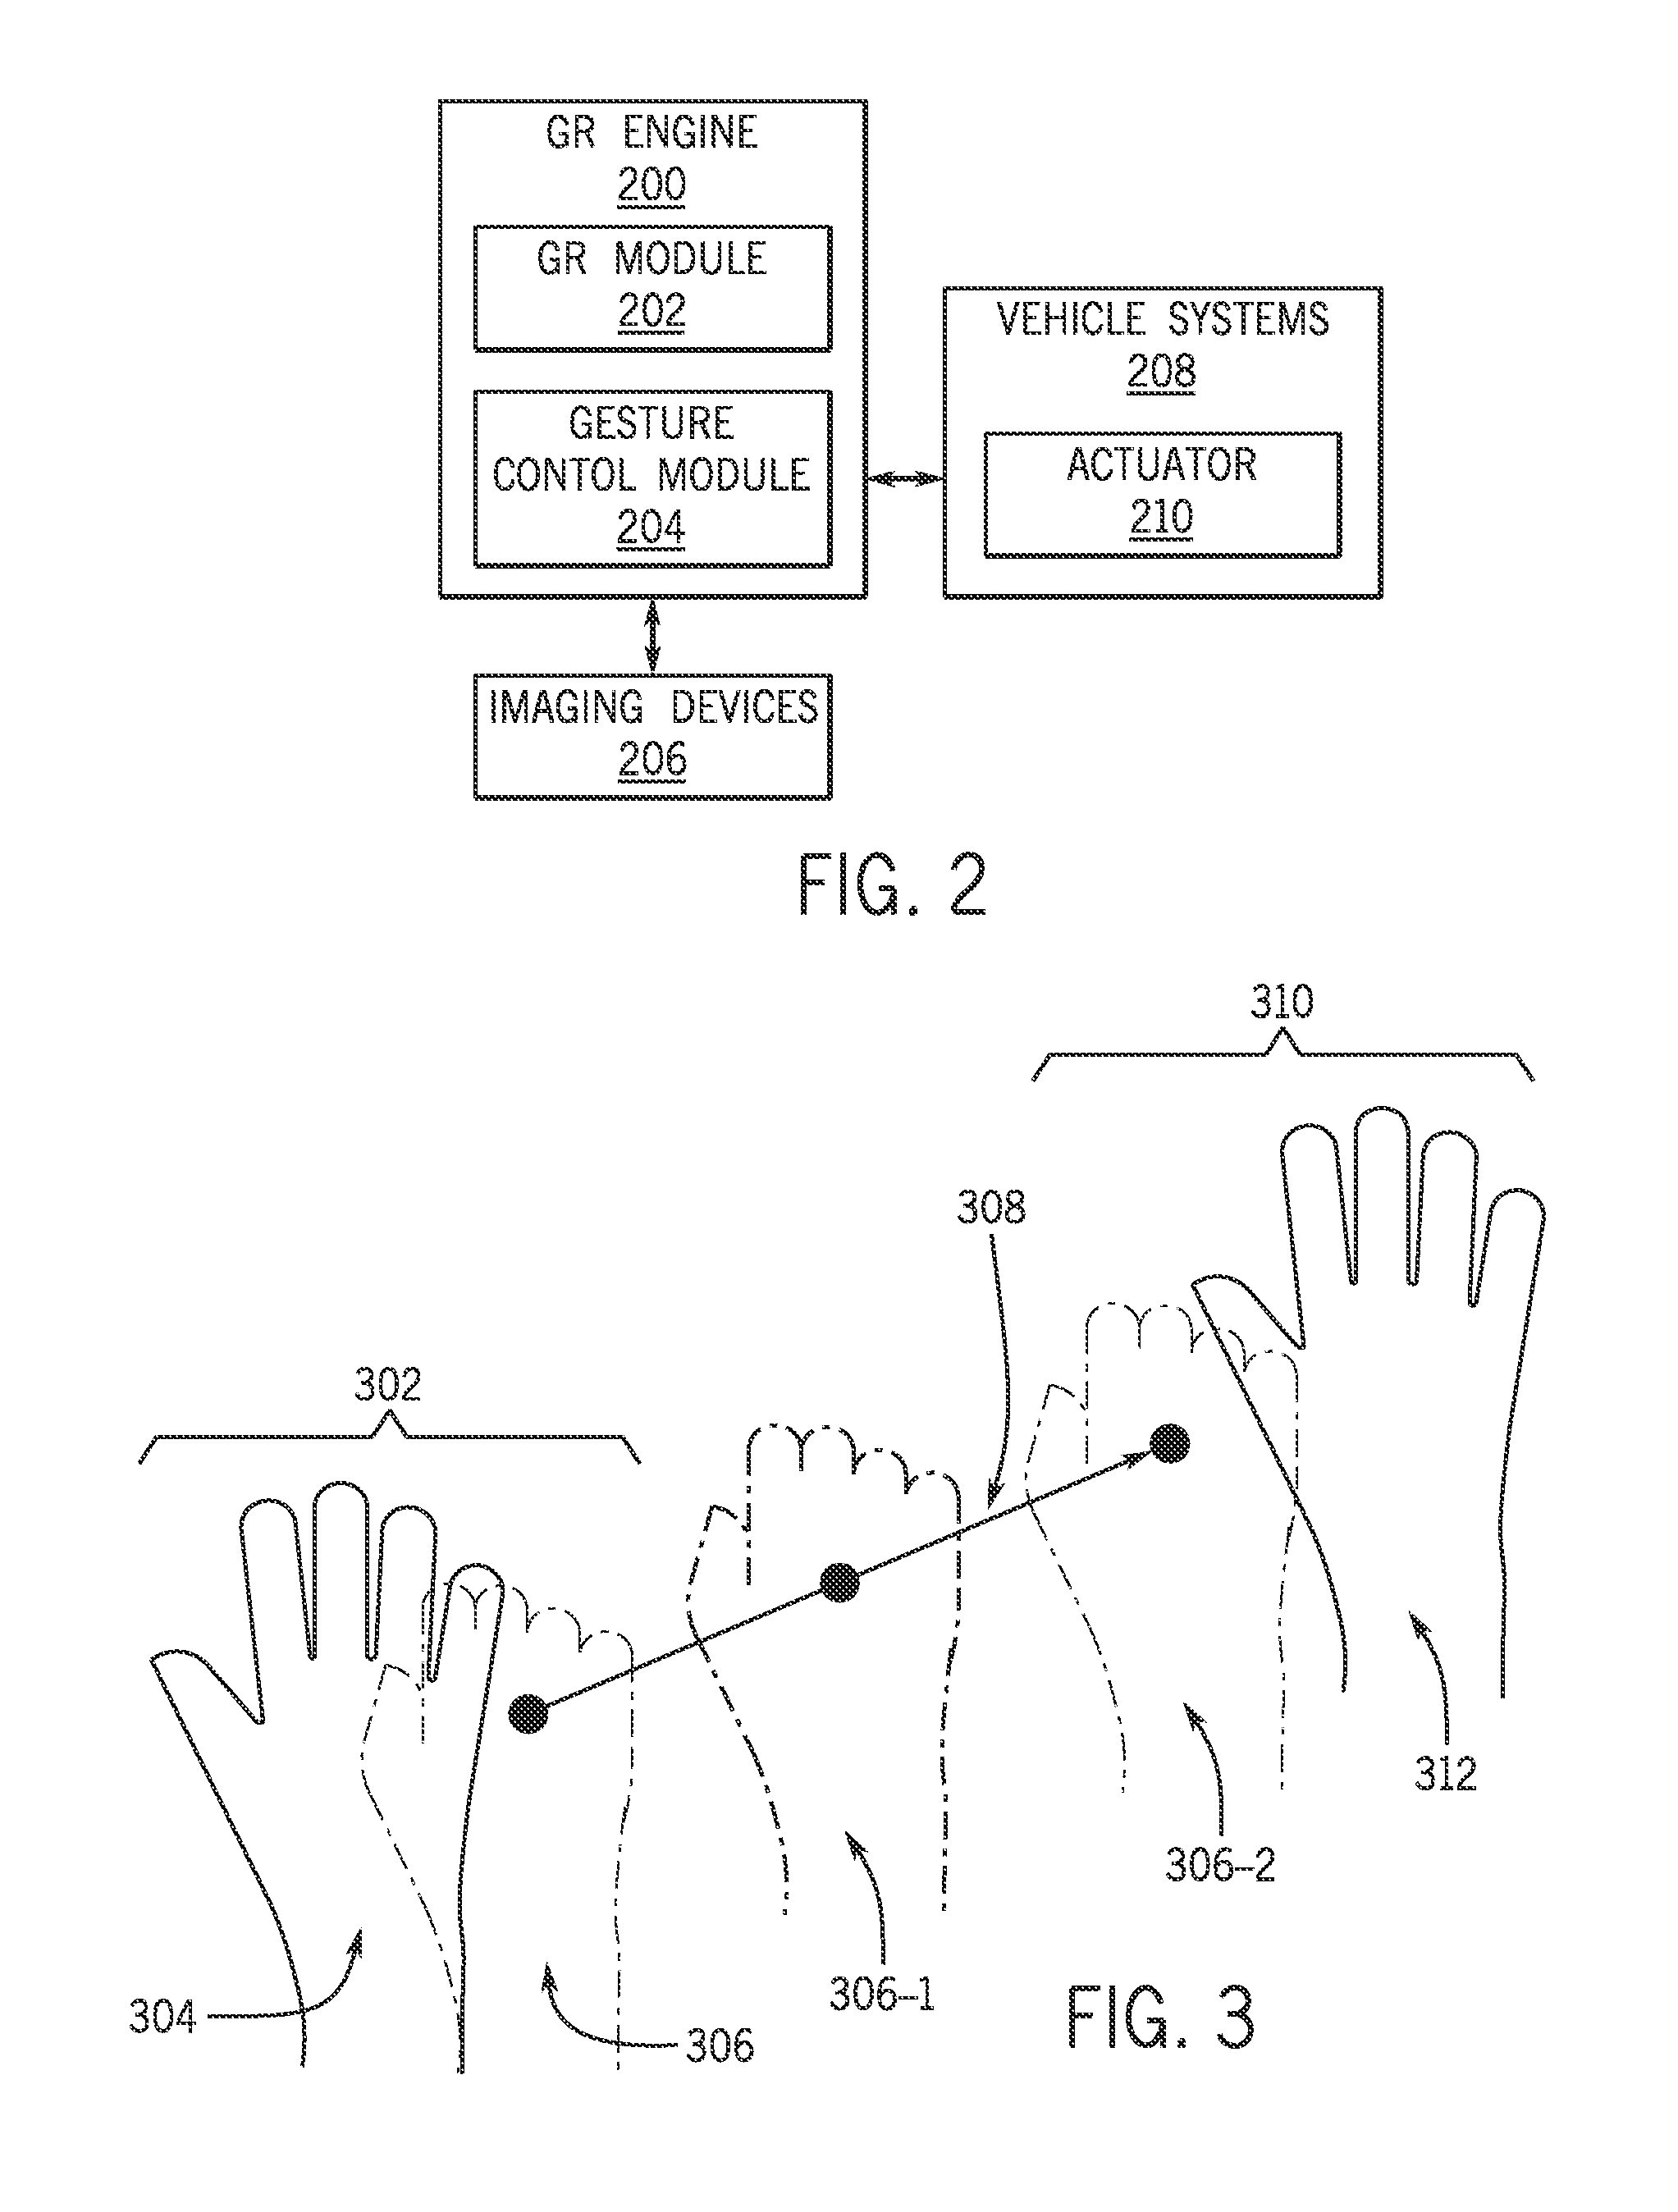 System and method for gestural control of vehicle systems